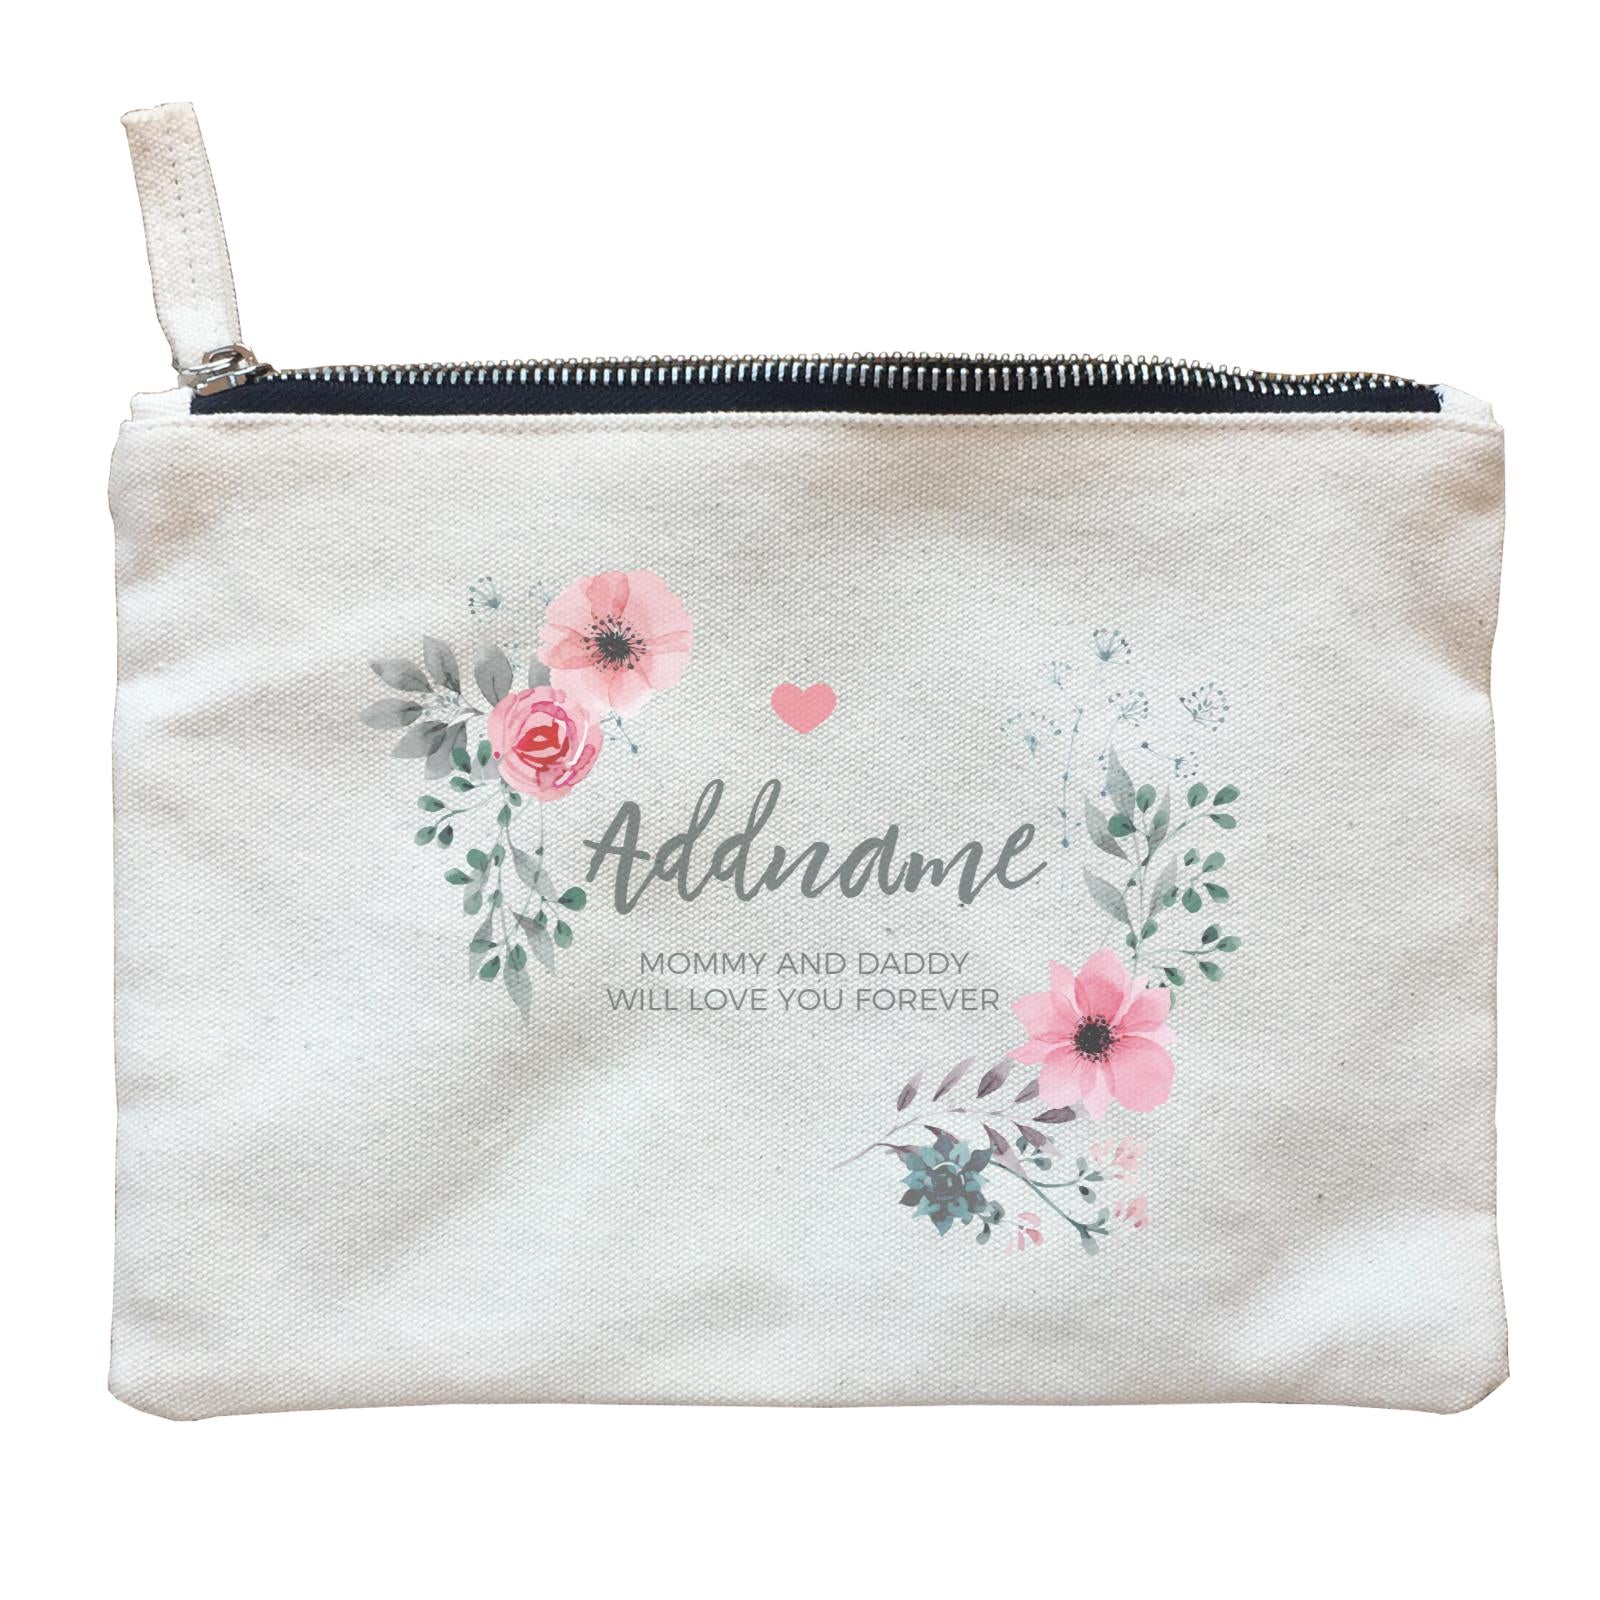 Watercolour Pink Flowers and Dark Wreath Personalizable with Name and Text Zipper Pouch